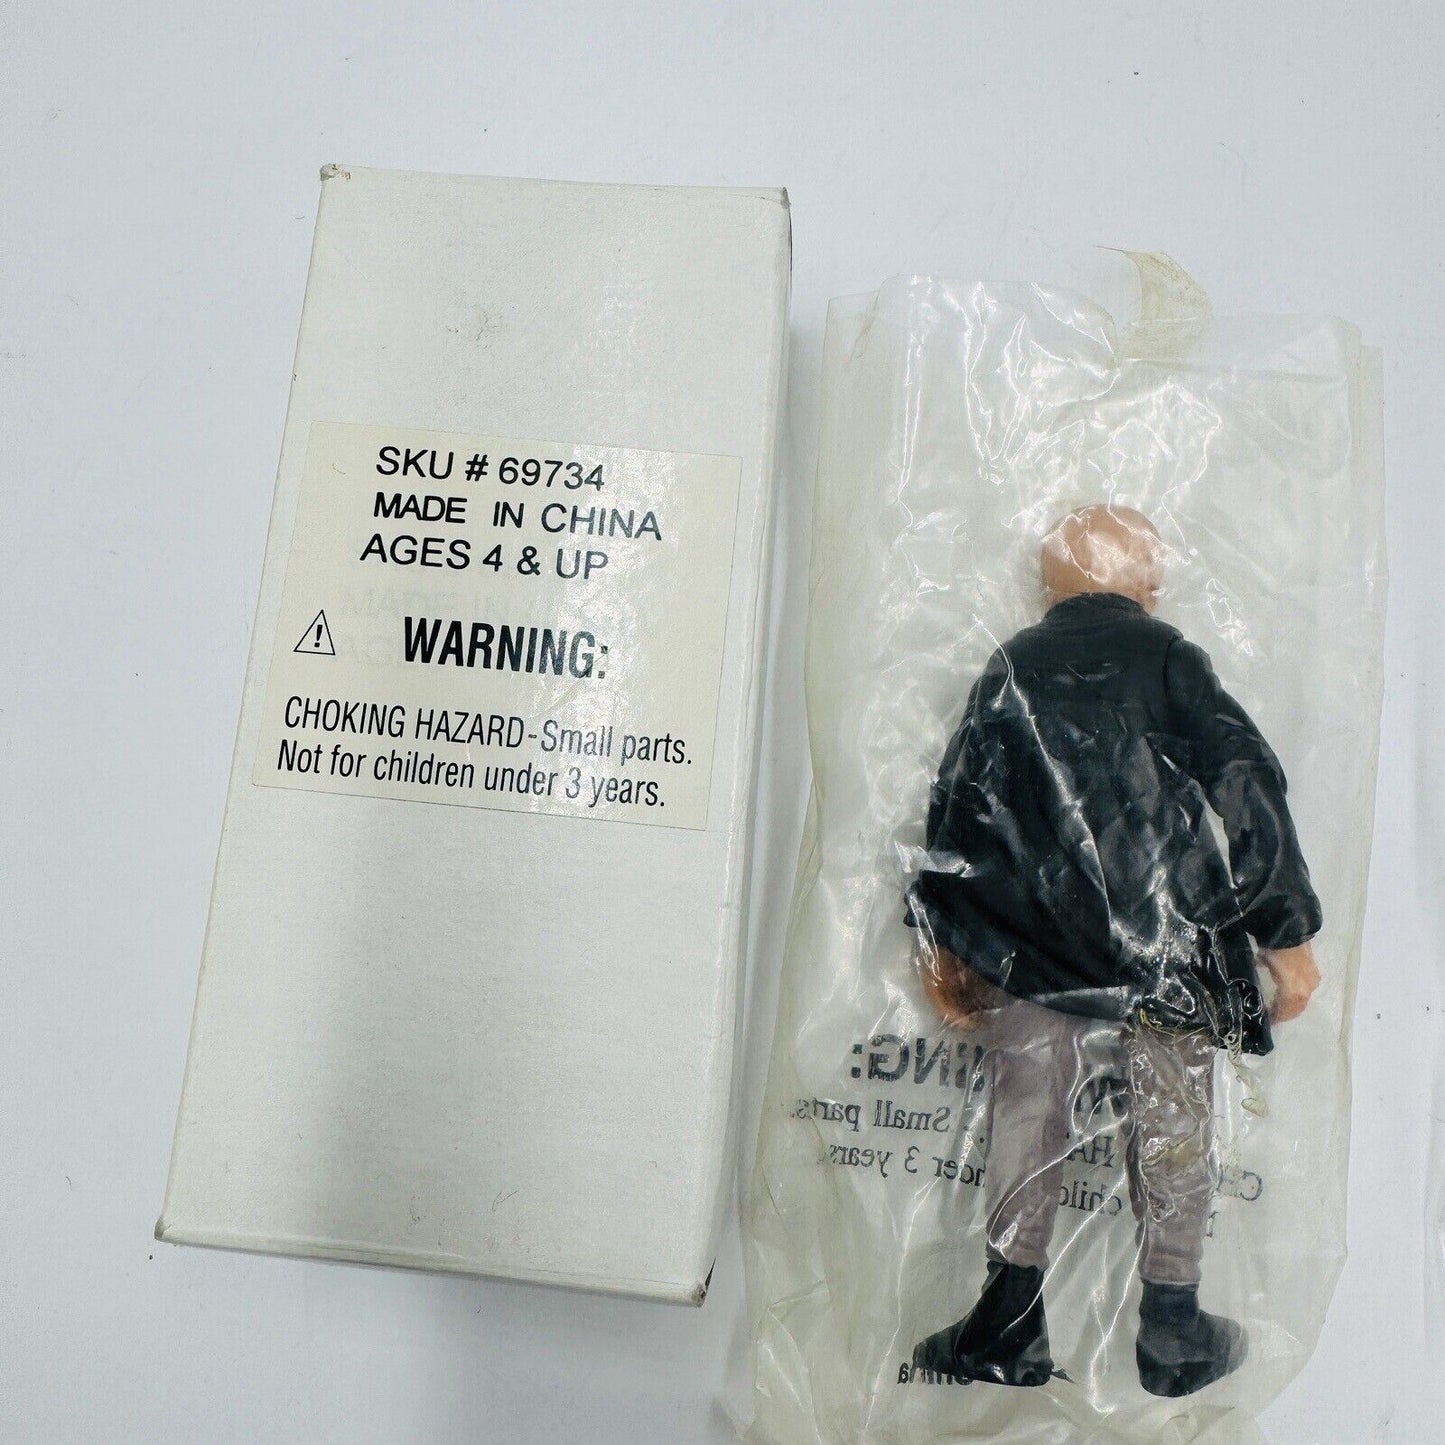 Kenner 1997 Star Wars Figrin D'an Cantina Band Member Mail Away Action Figurine